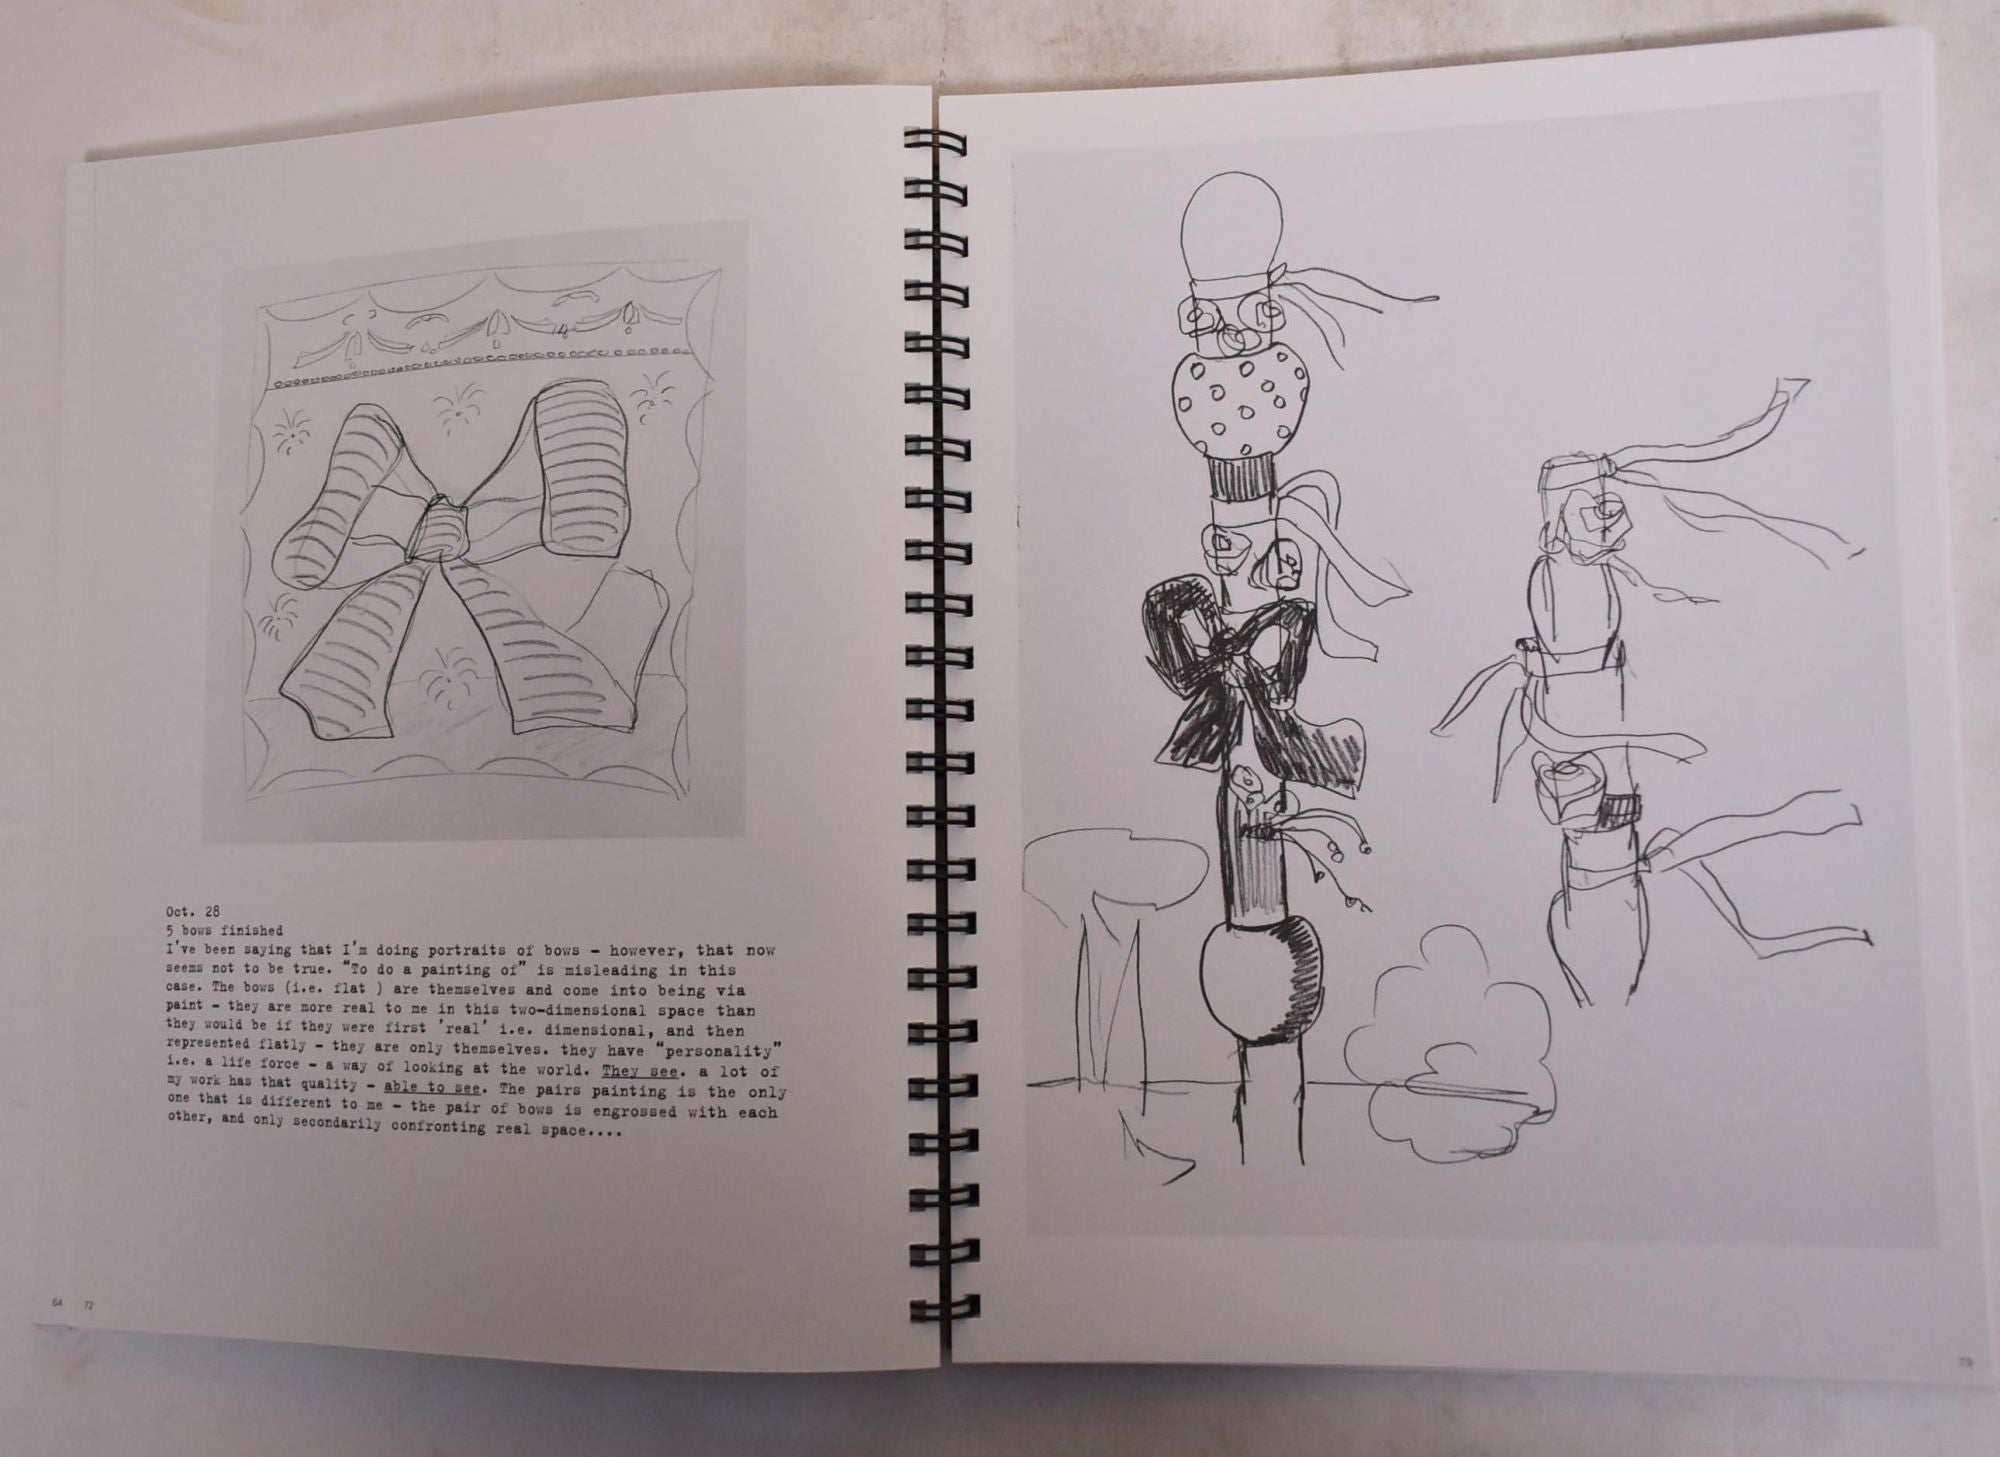 The Mating Habits Of Lines: Sketchbooks and Notebooks of Ree Morton by Ree  Morton on Mullen Books